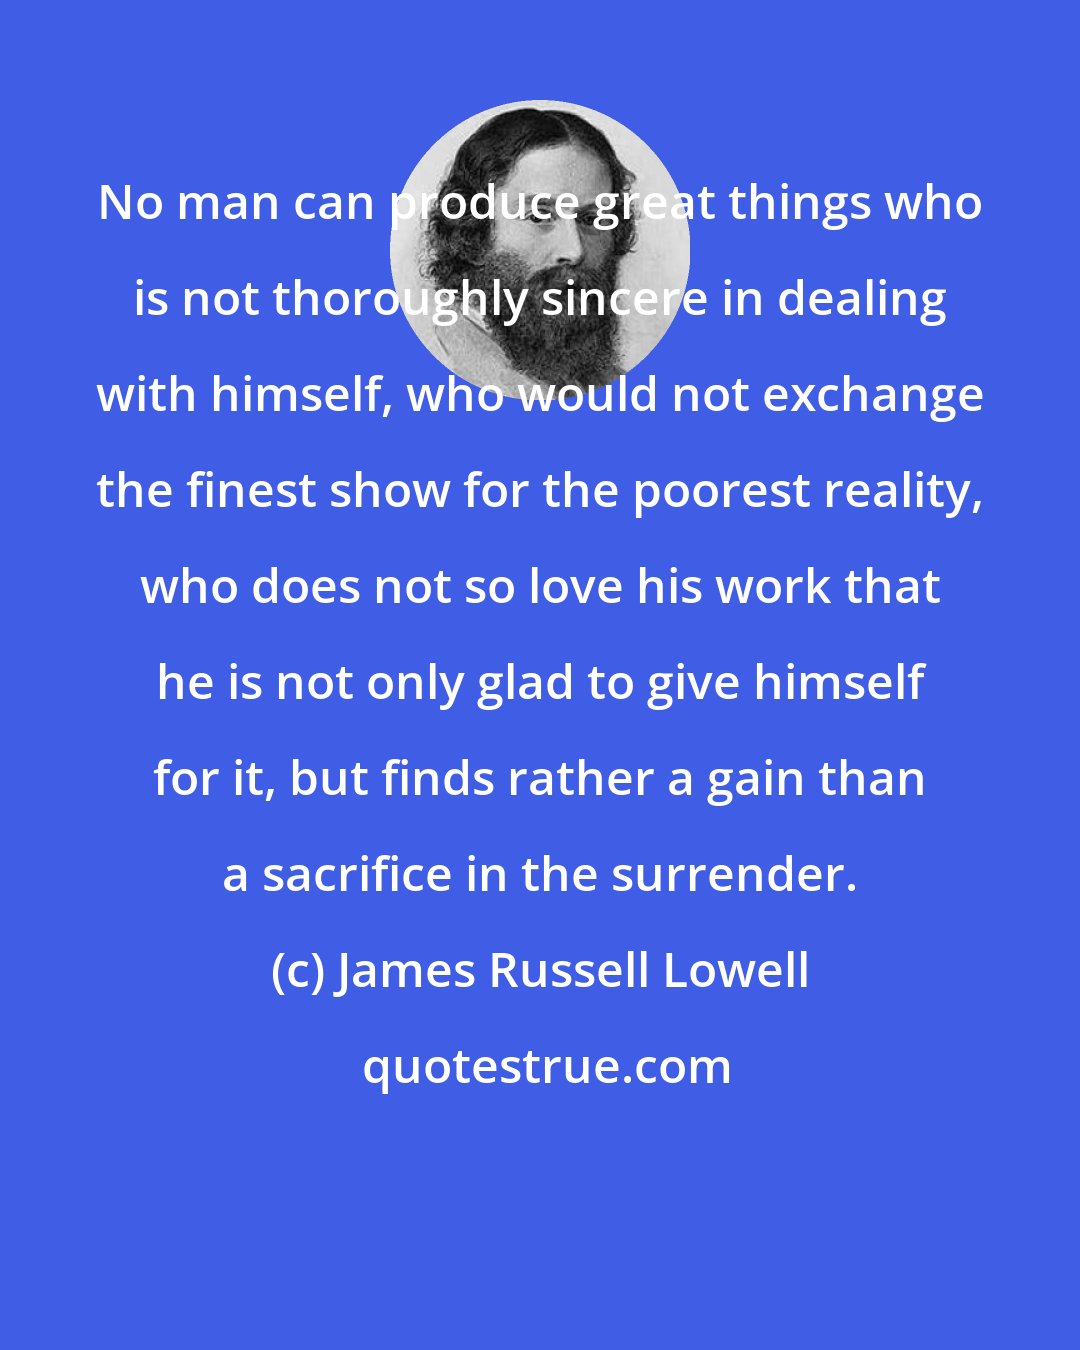 James Russell Lowell: No man can produce great things who is not thoroughly sincere in dealing with himself, who would not exchange the finest show for the poorest reality, who does not so love his work that he is not only glad to give himself for it, but finds rather a gain than a sacrifice in the surrender.